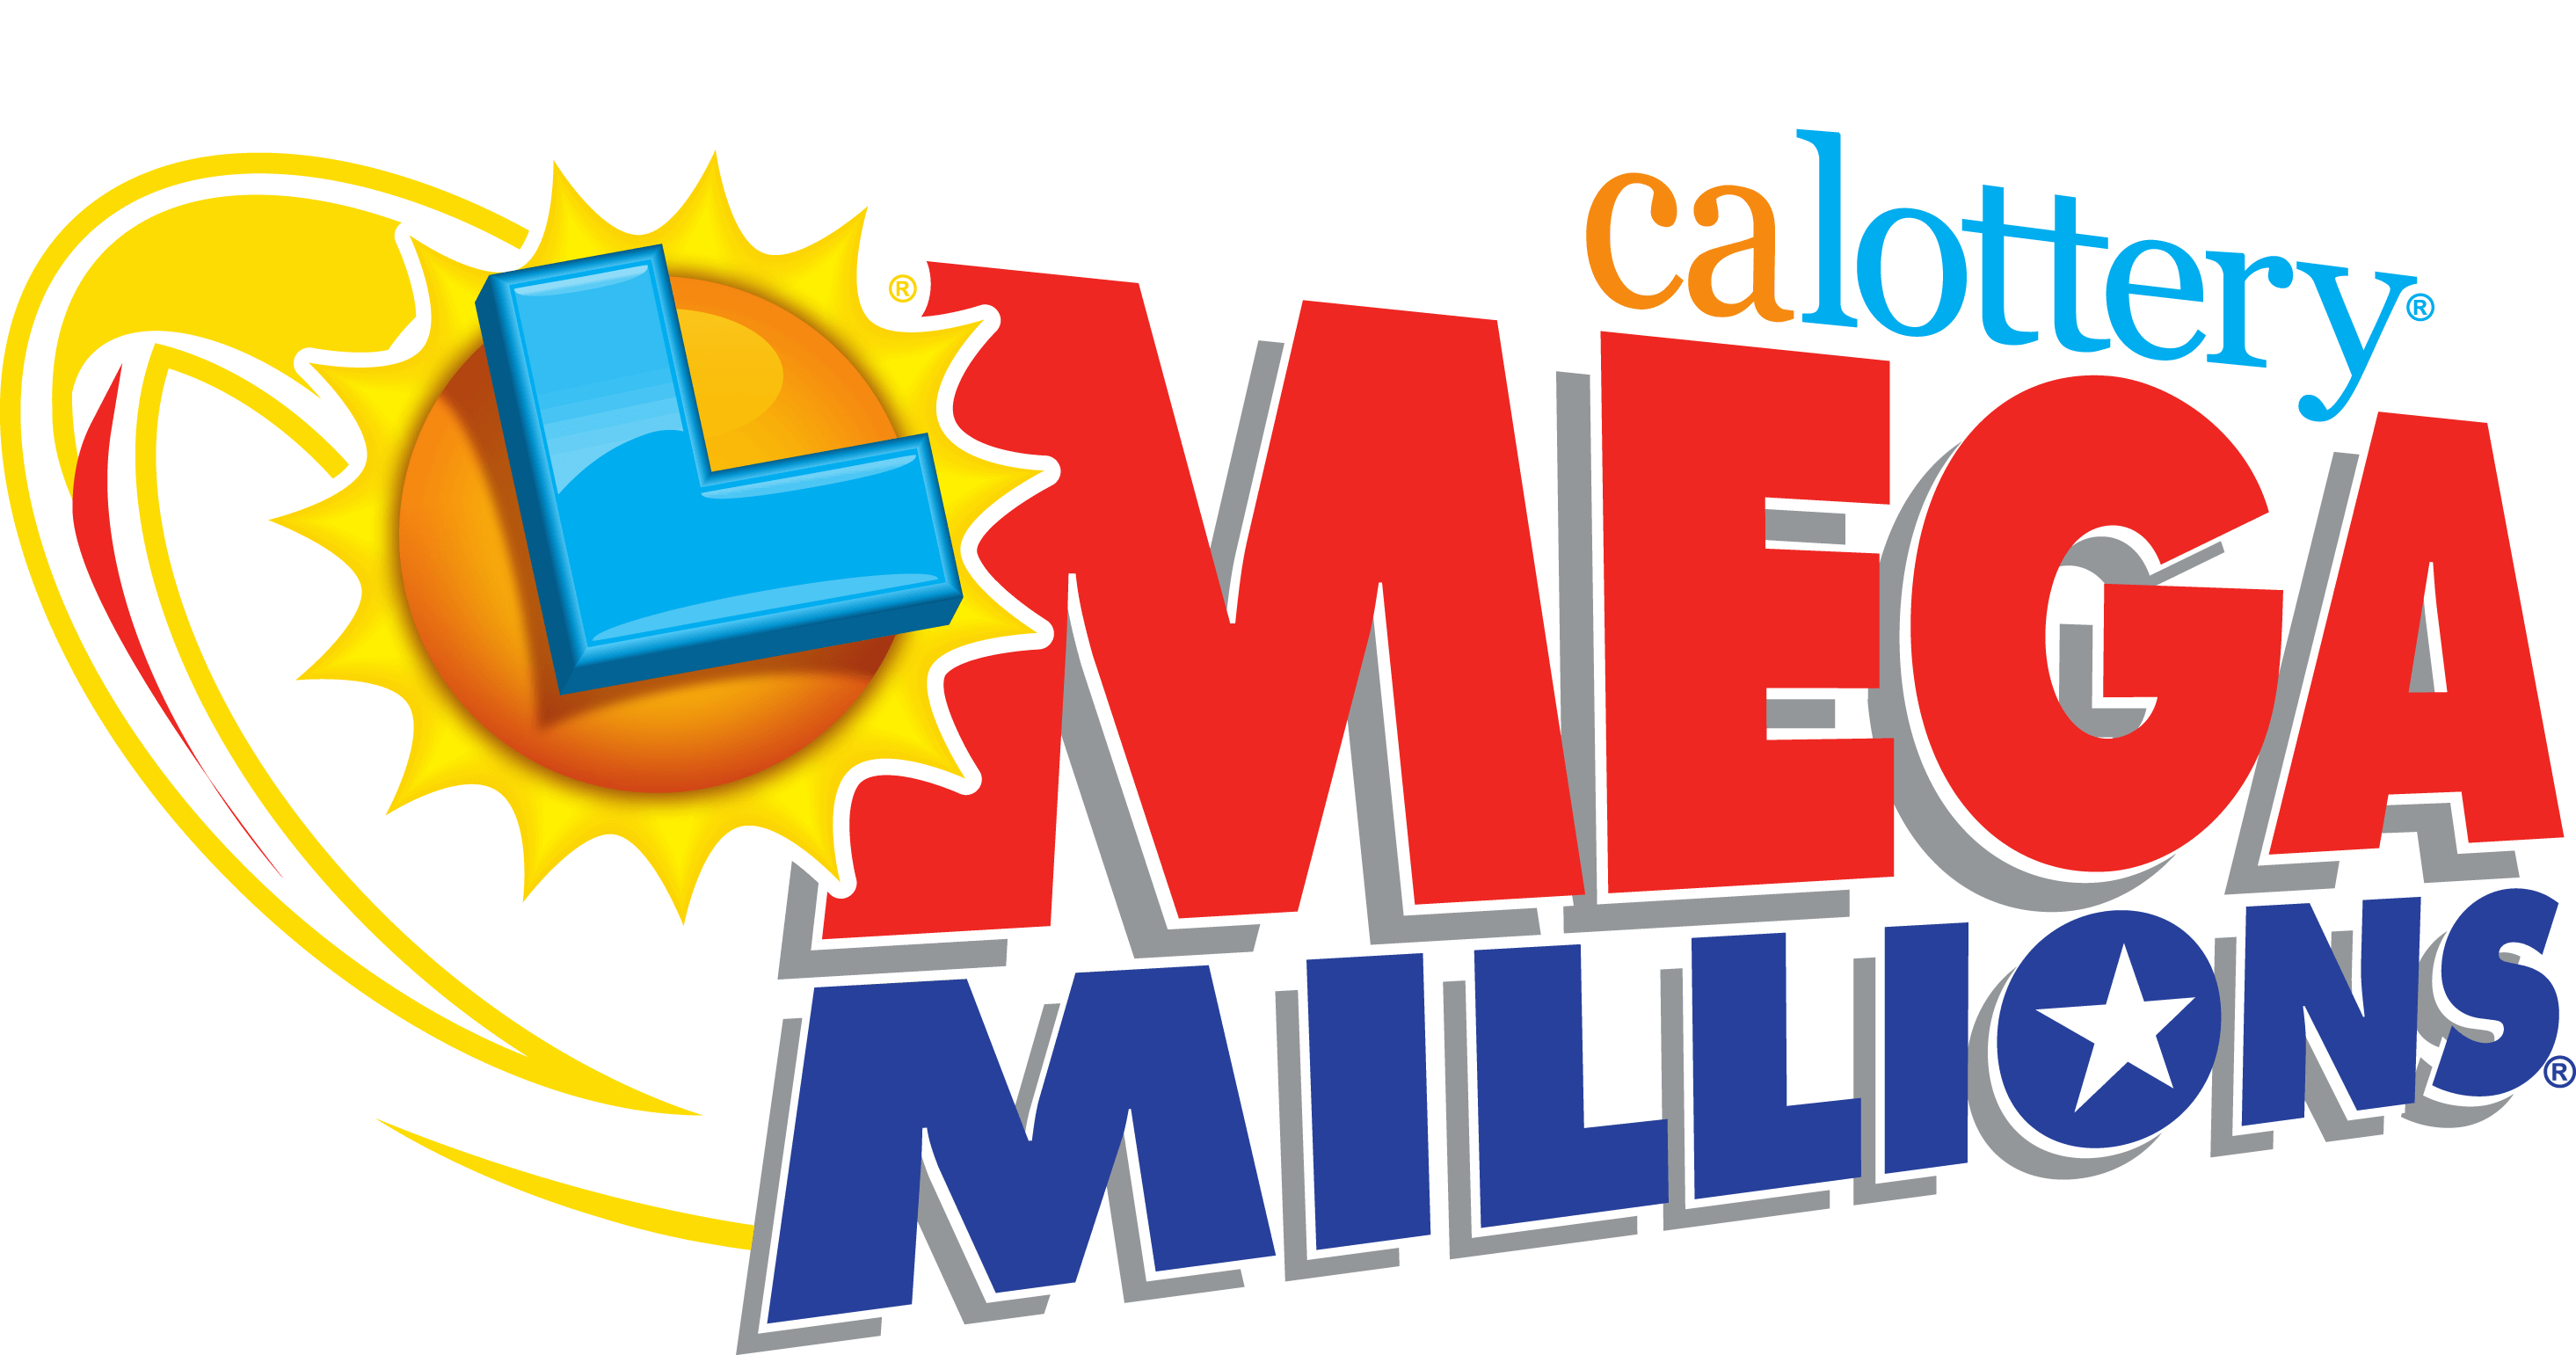 calottery past winning numbers